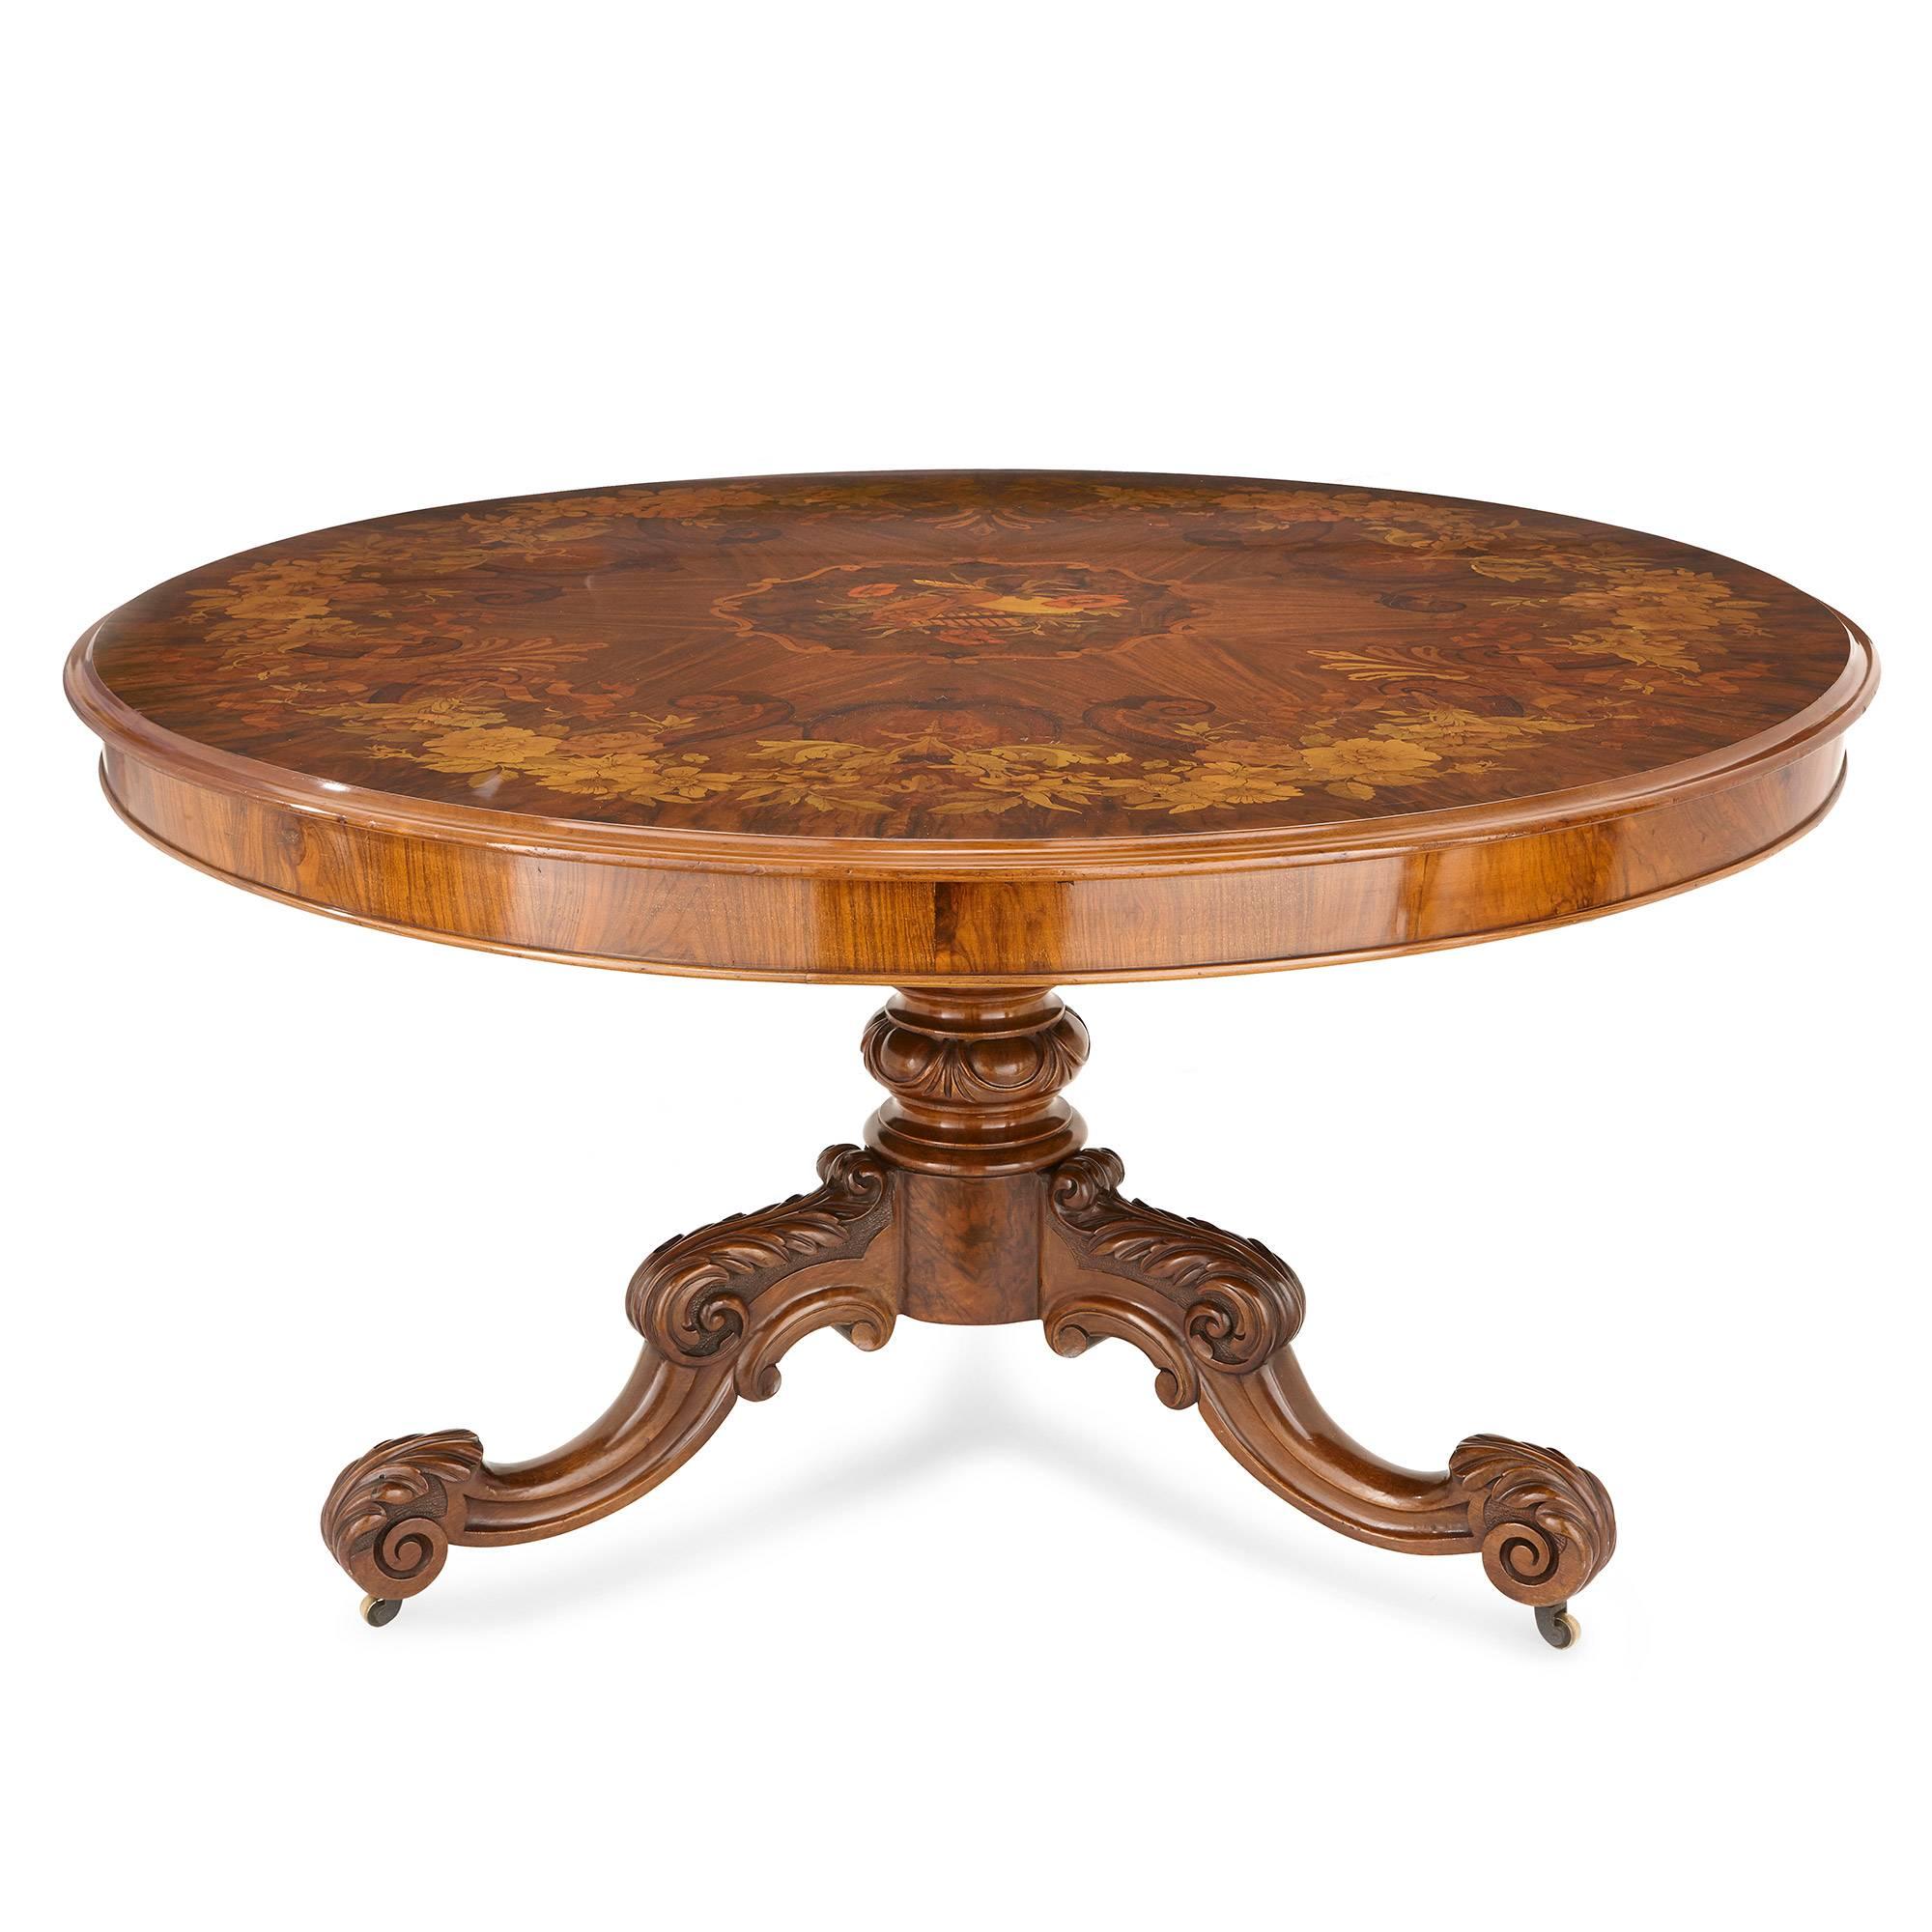 This centre table is well suited to a range of interior settings, and will add Victorian sophistication and charm to any room. Its top can be tilted from flat to upright, so as to better display the Fine marquetry decorations which adorn the front